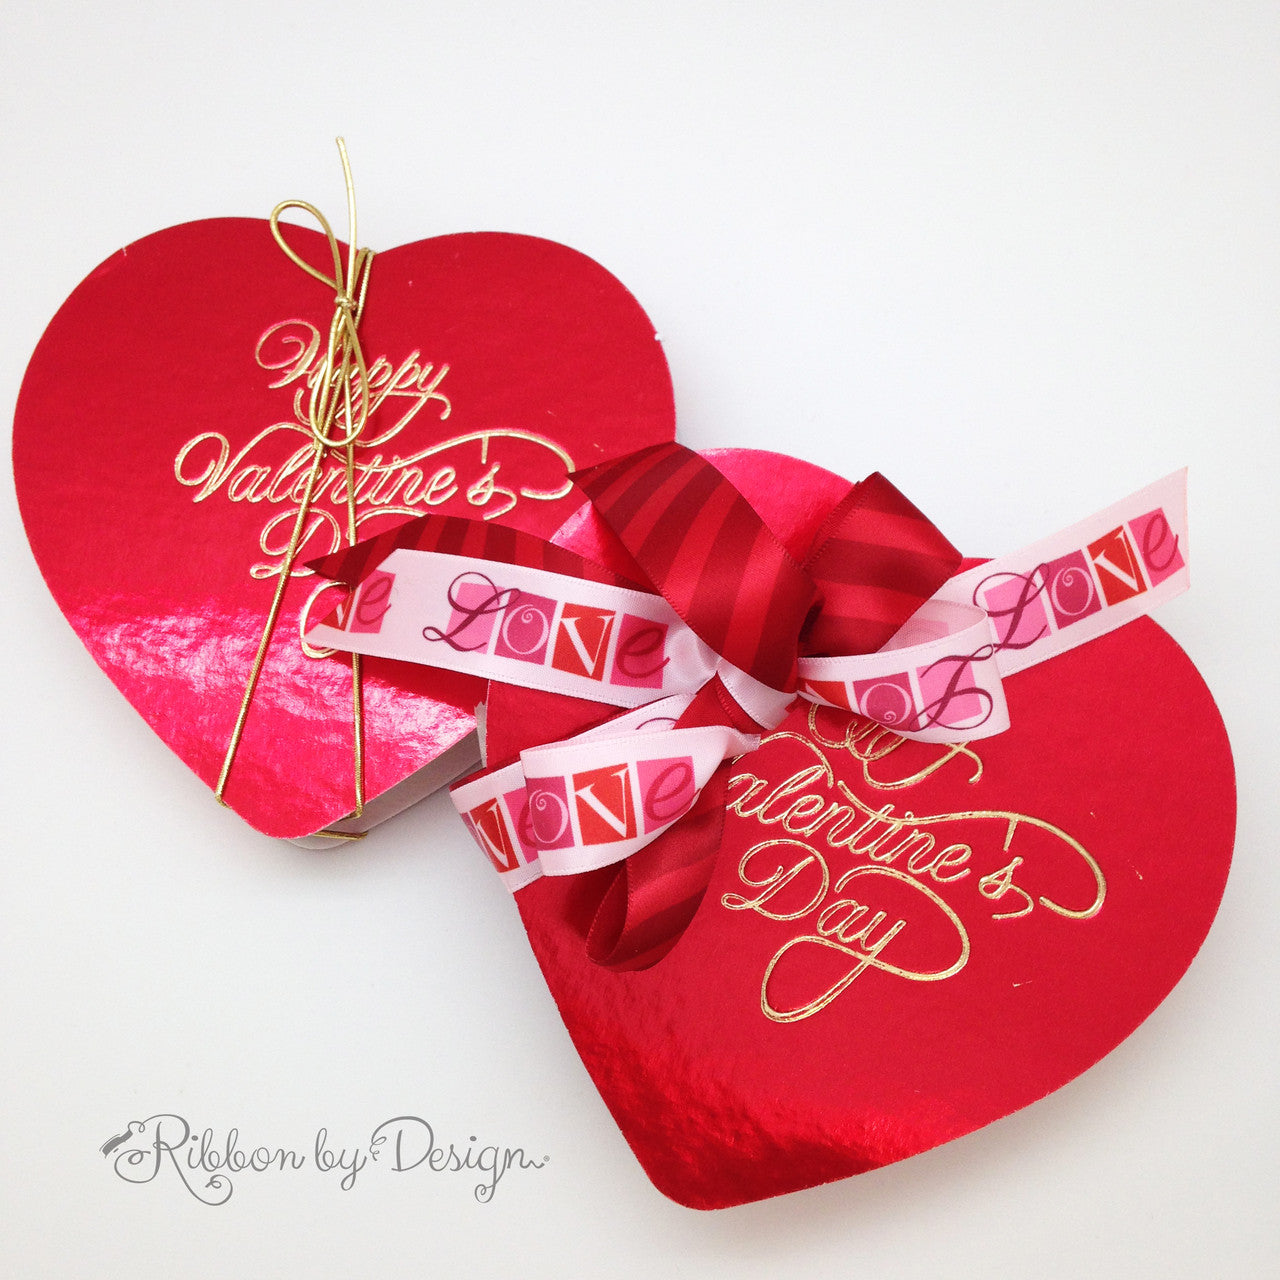 Make even the smallest love gesture a little more special by adding our sweet printed ribbons to a box of chocolates!